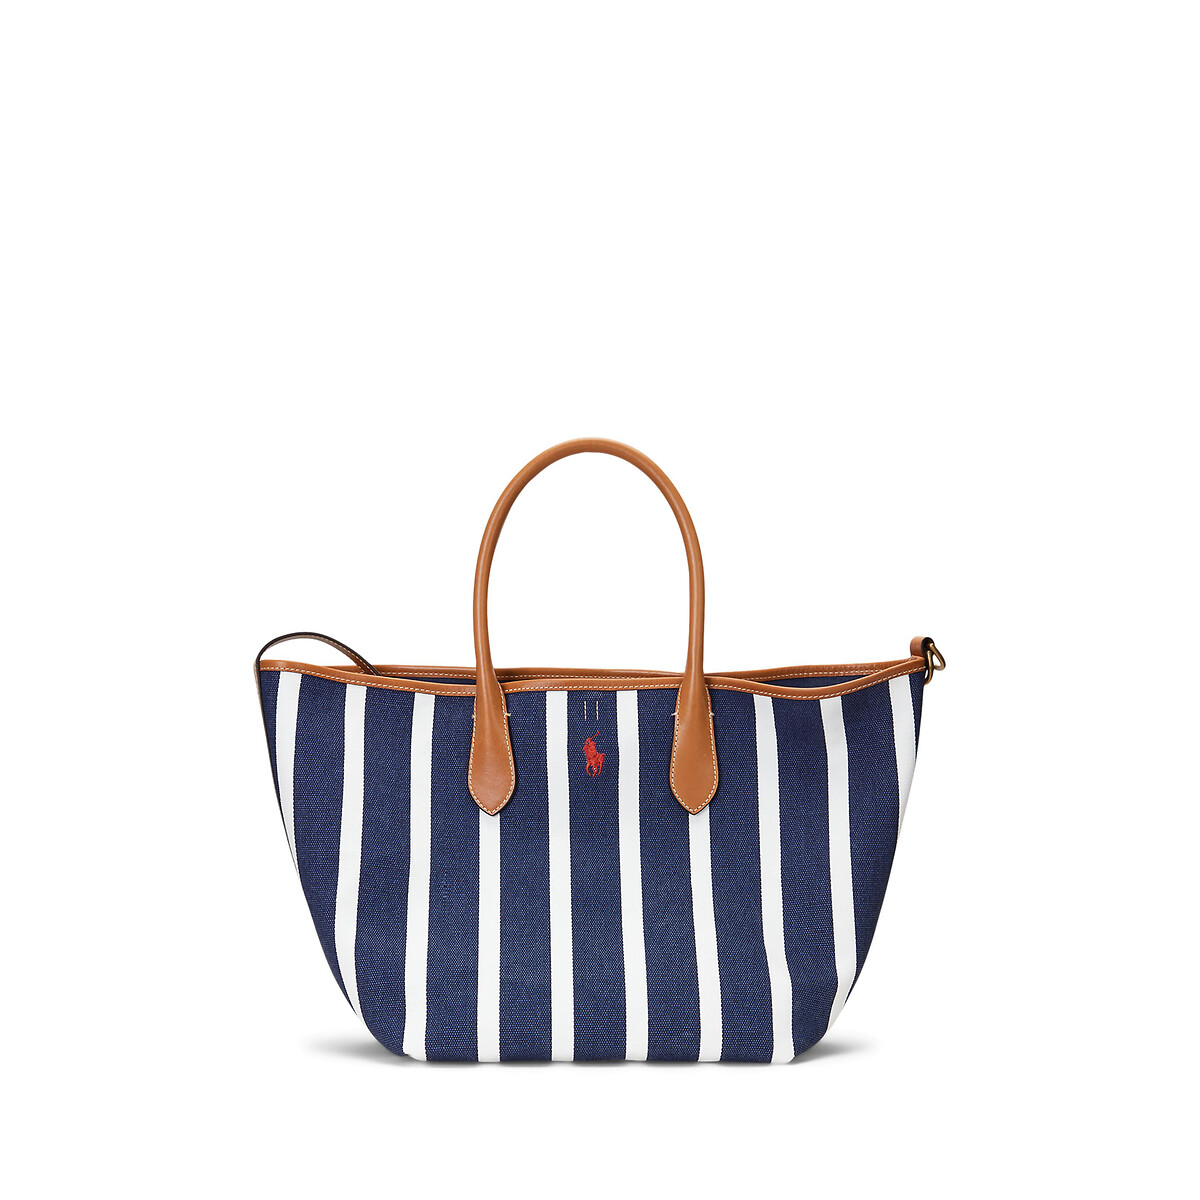 Striped Cotton Canvas Tote Bag with Contrasting Handles